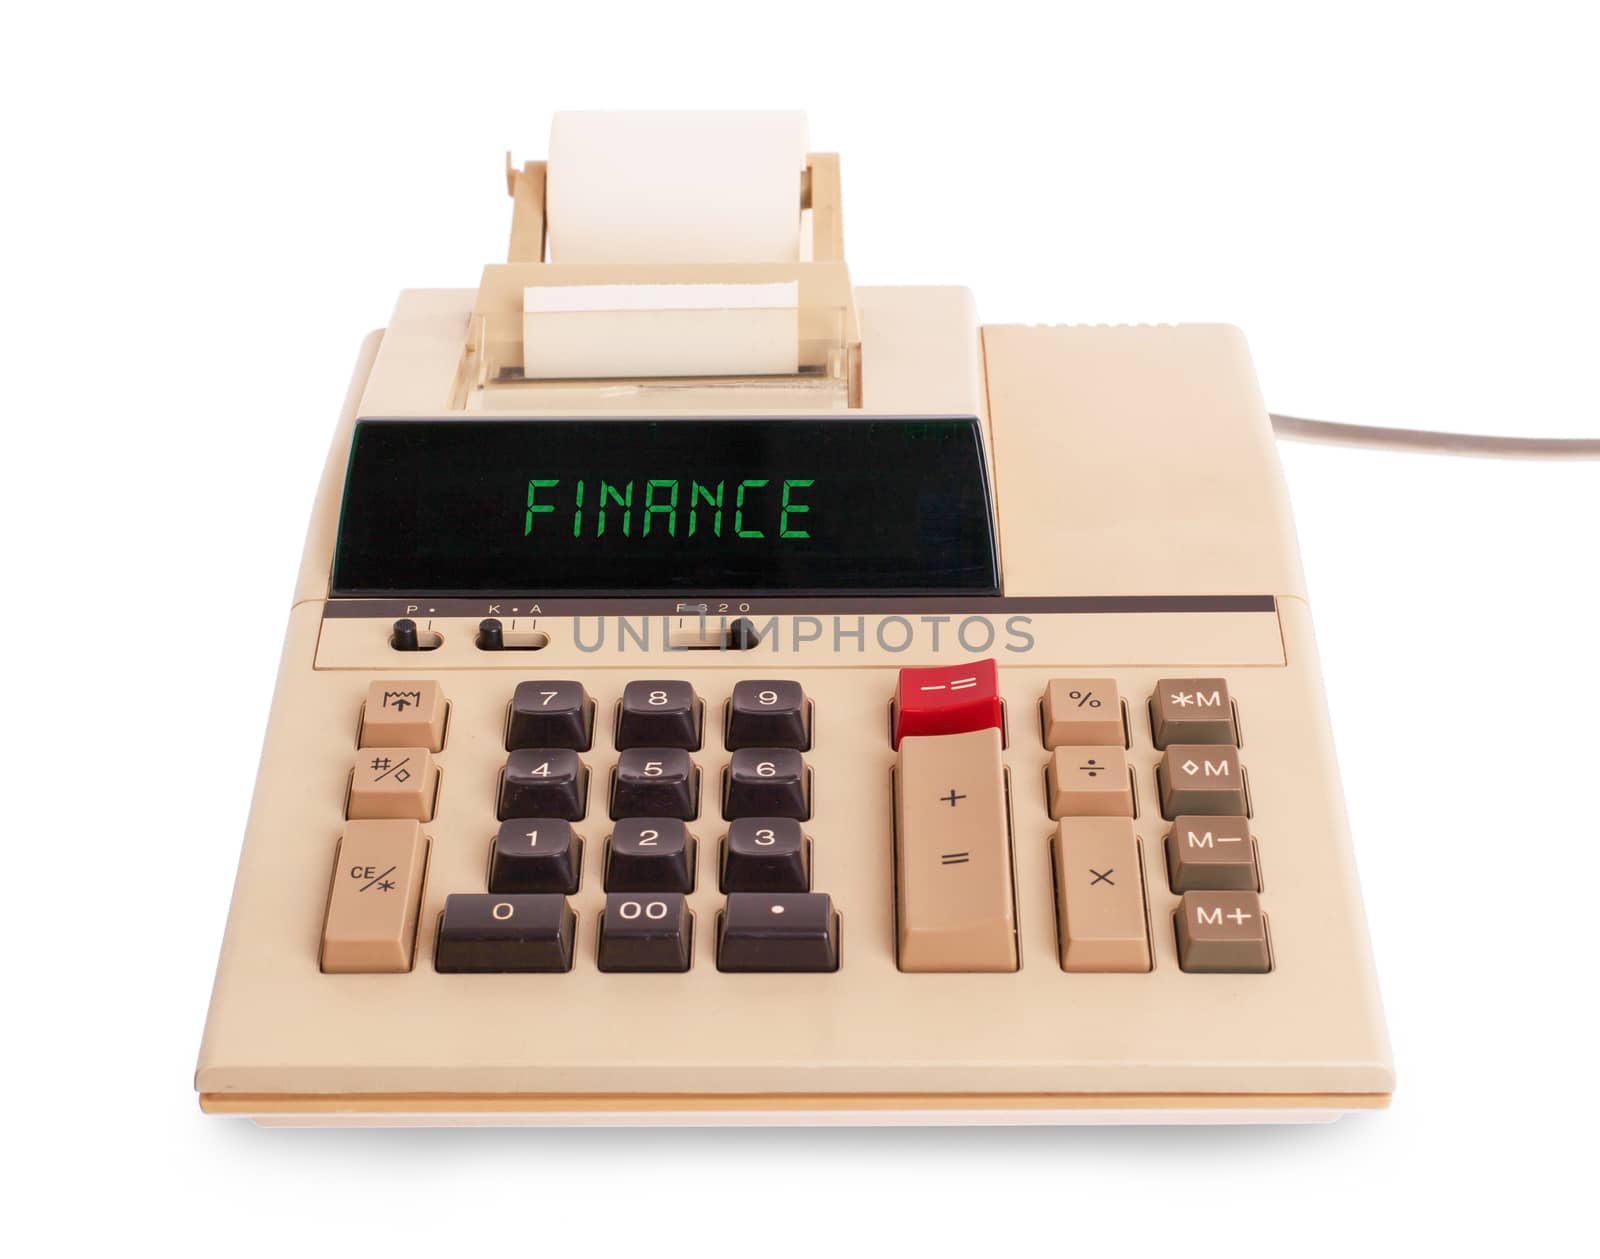 Old calculator - finance by michaklootwijk